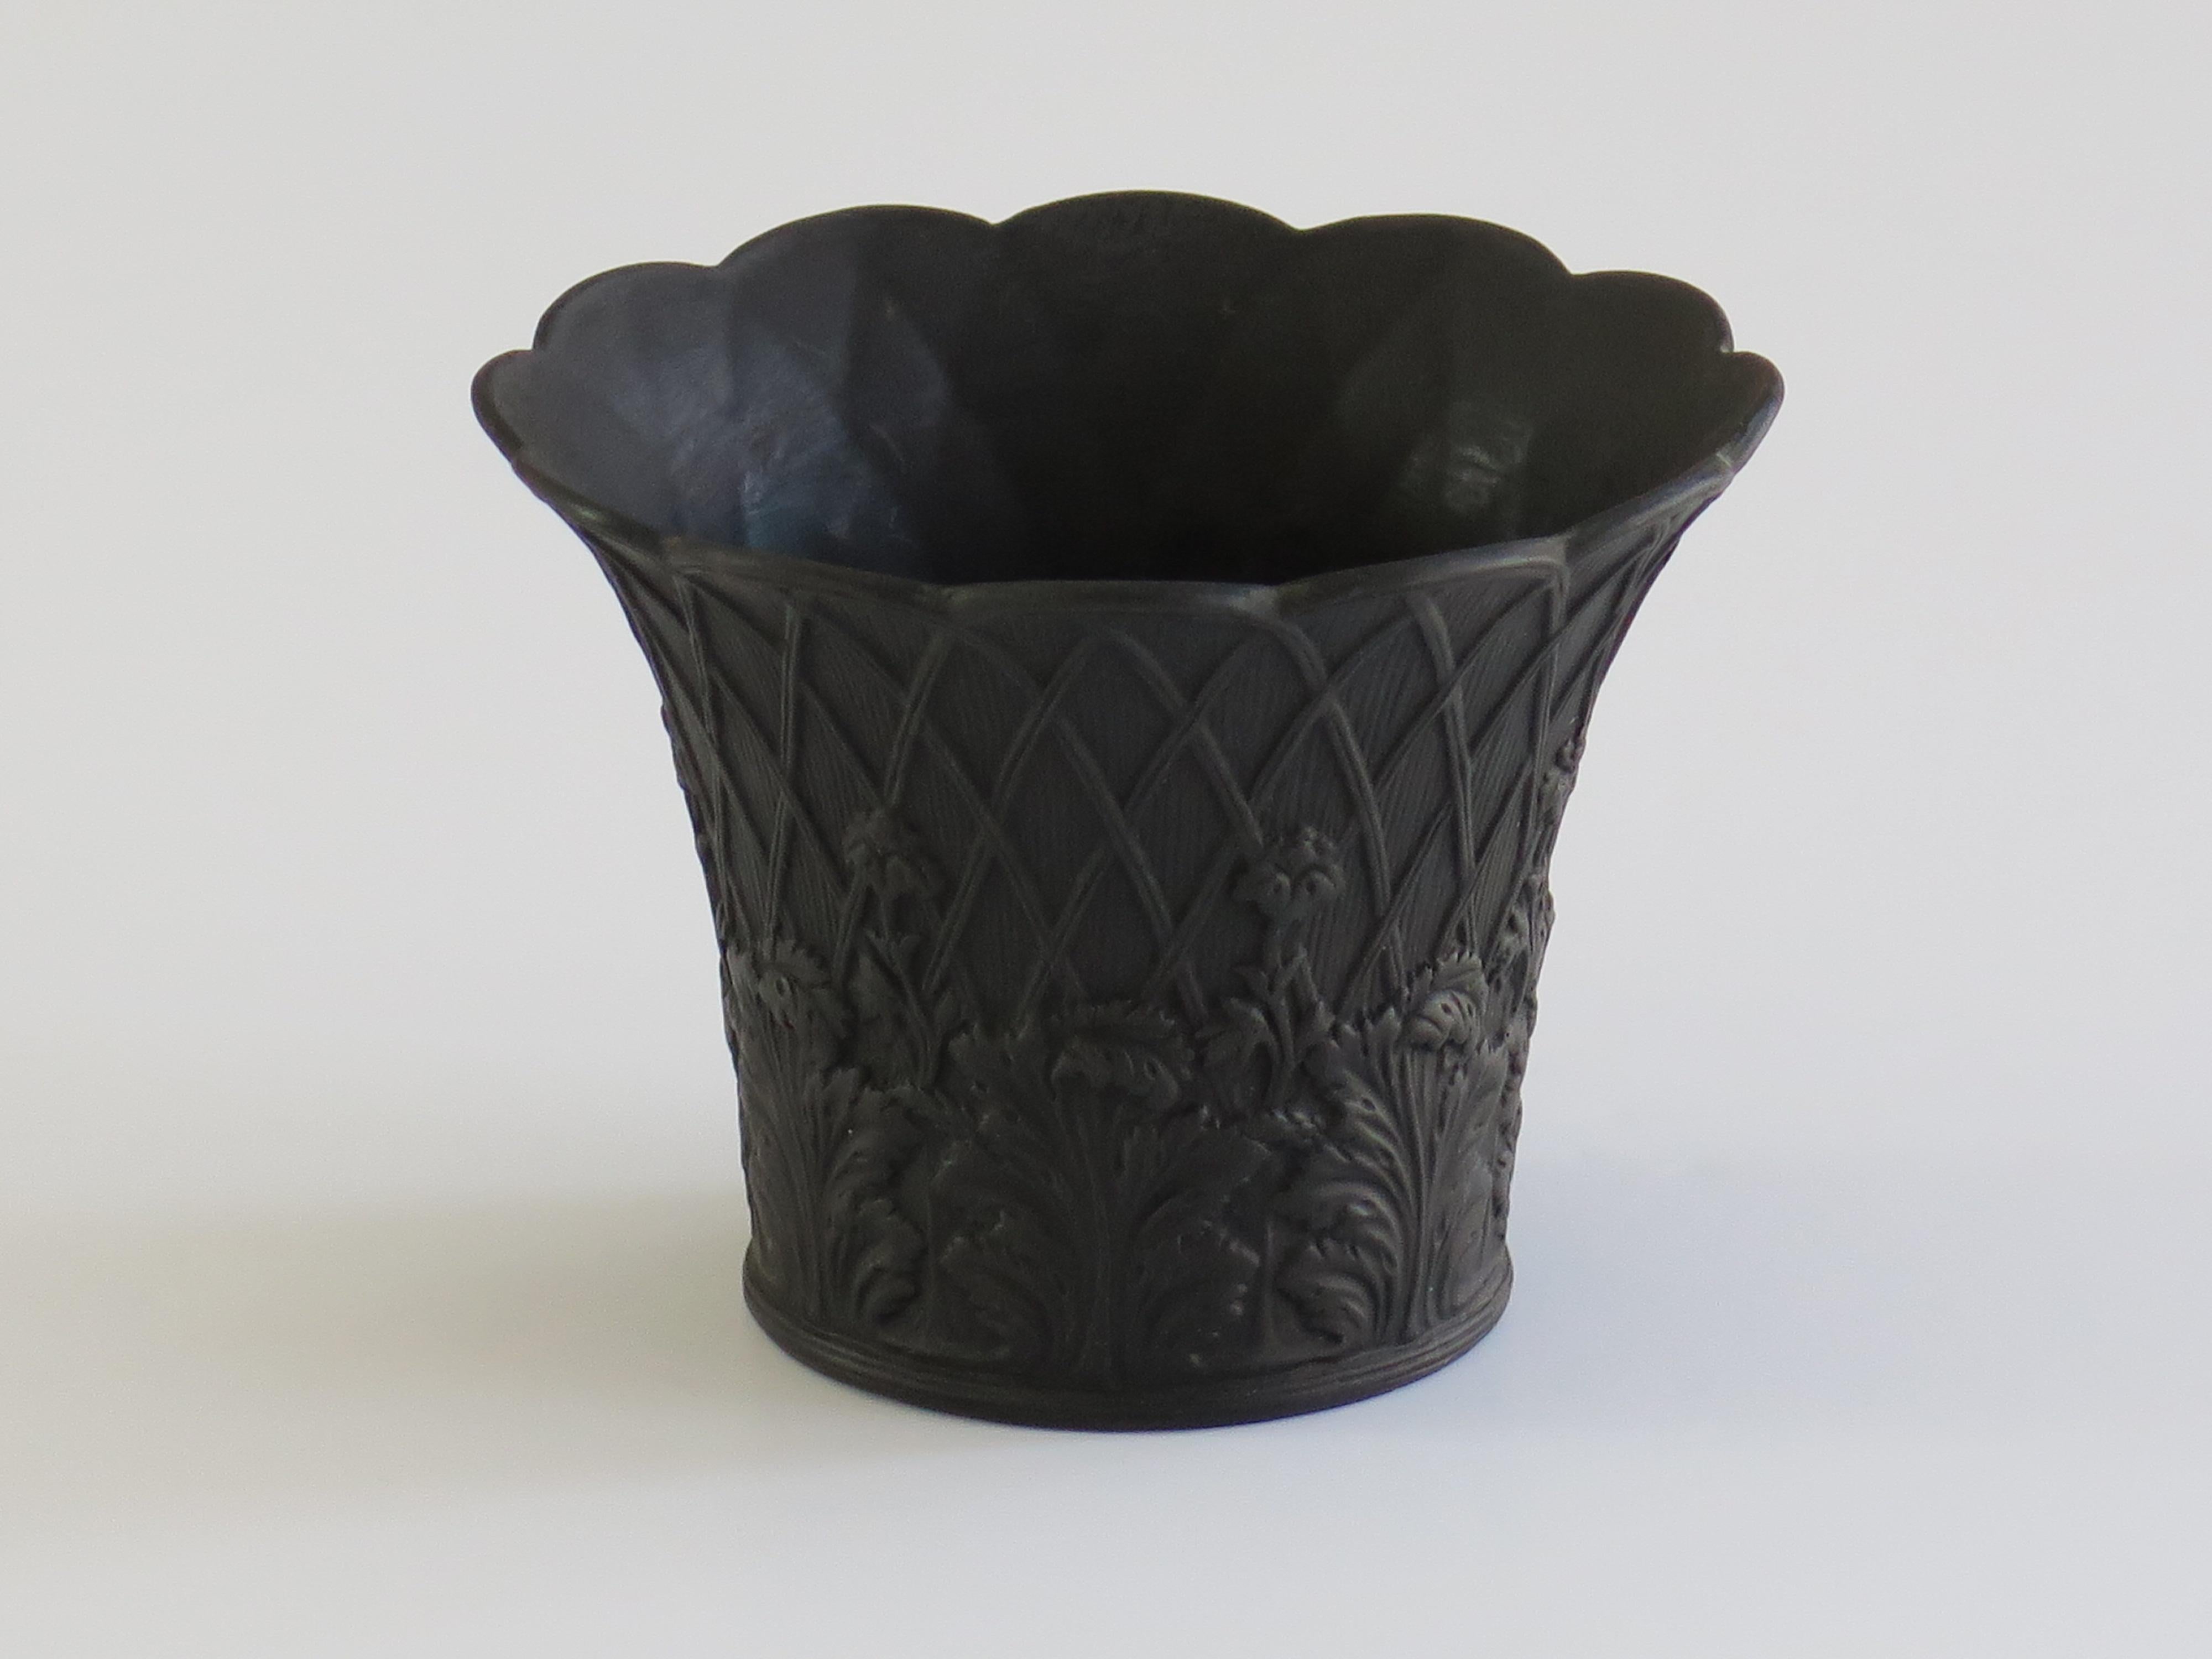 This is a good black basalt small Flowerpot, made by Wedgwood and dating to the early 20th century, circa 1920s. 

The piece is well potted in a traditional flowerpot shape with an everted rim having a wavy edge.

The decoration shows a